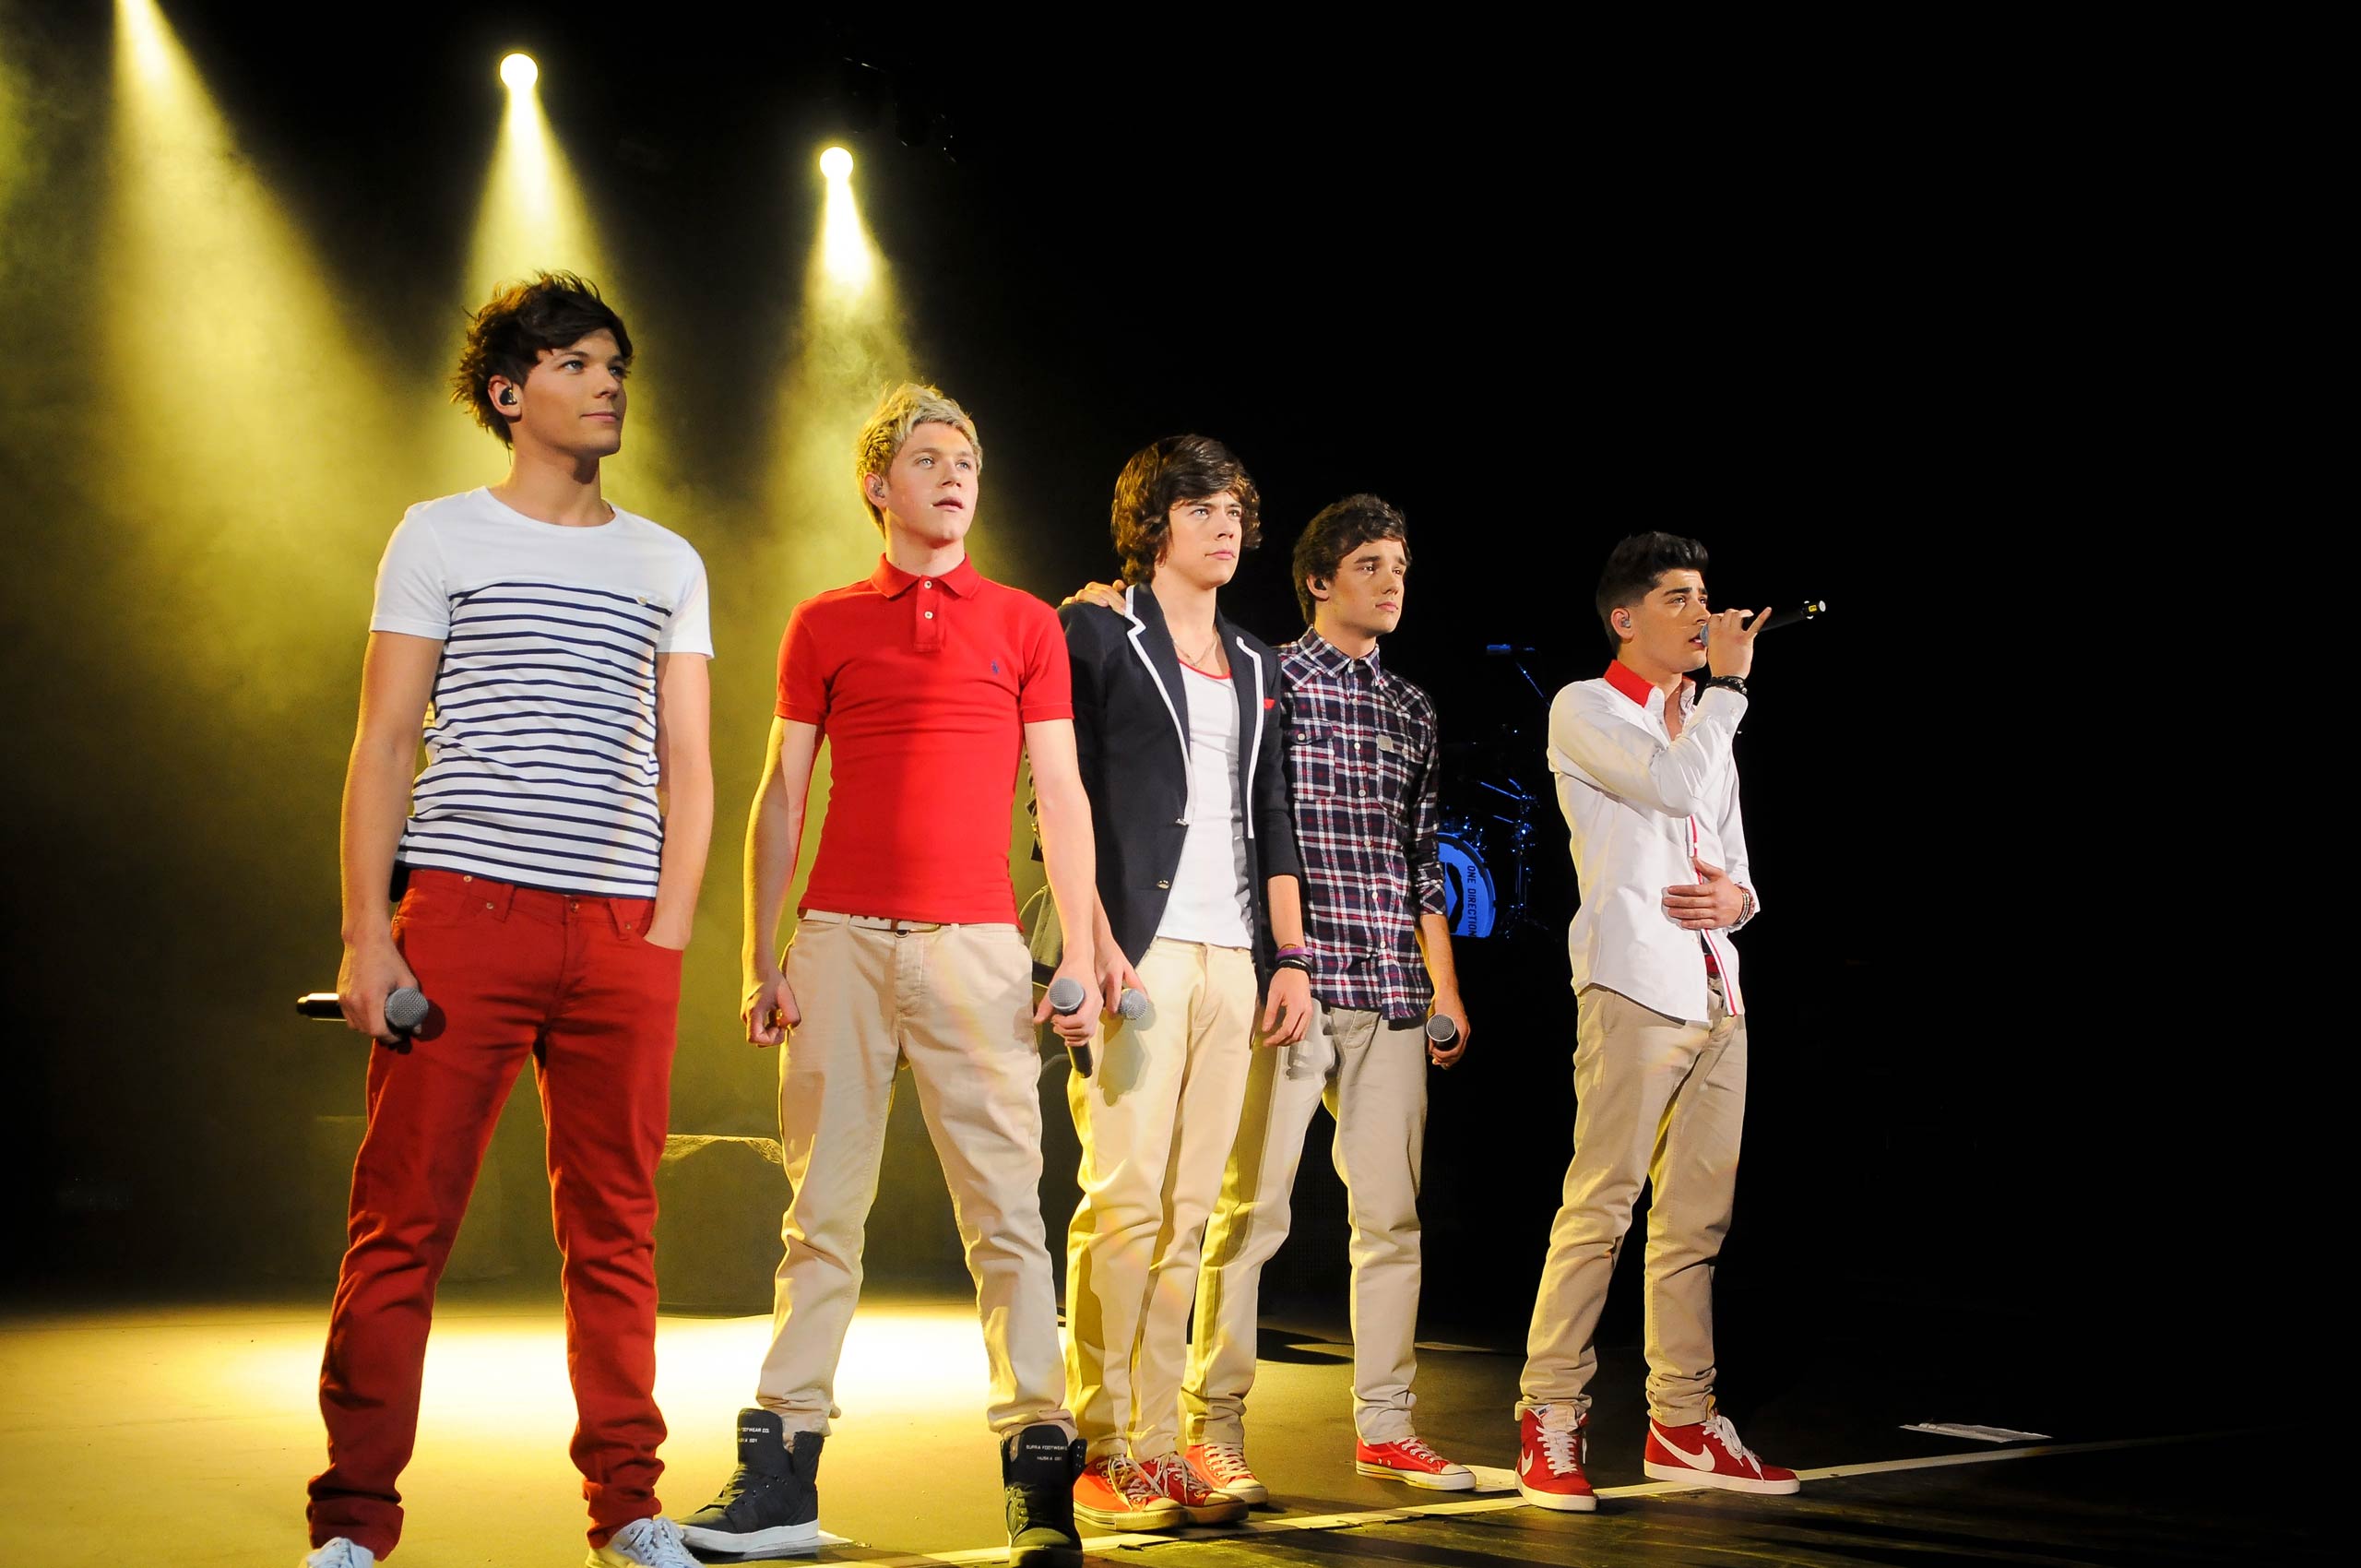 Louis Tomlinson, Niall Horan, Harry Styles, Liam Payne and Zayn Malik of One Direction perform at HMV Hammersmith Apollo in London, England in 2012.